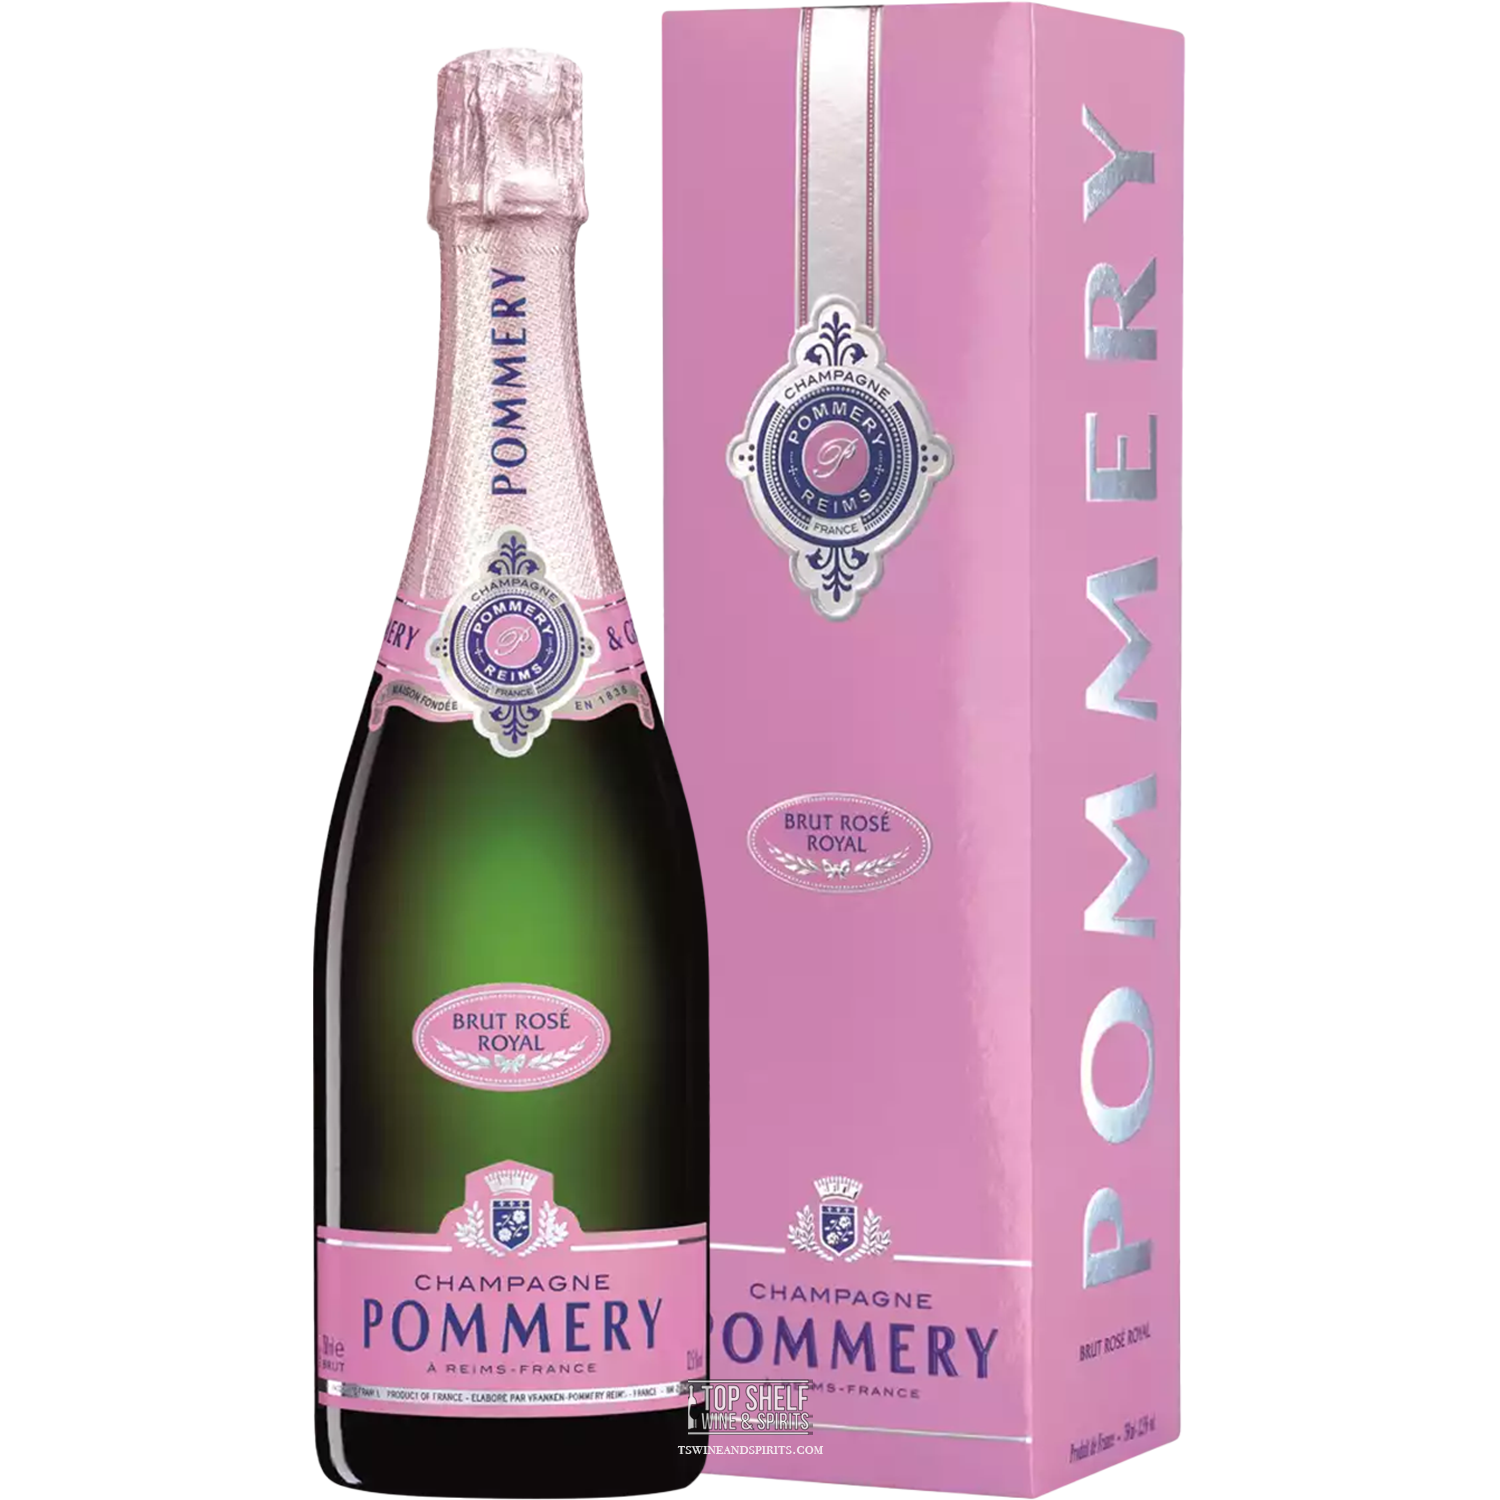 Pommery Brut Rosé Royal Champagne | Delivery & Gifting